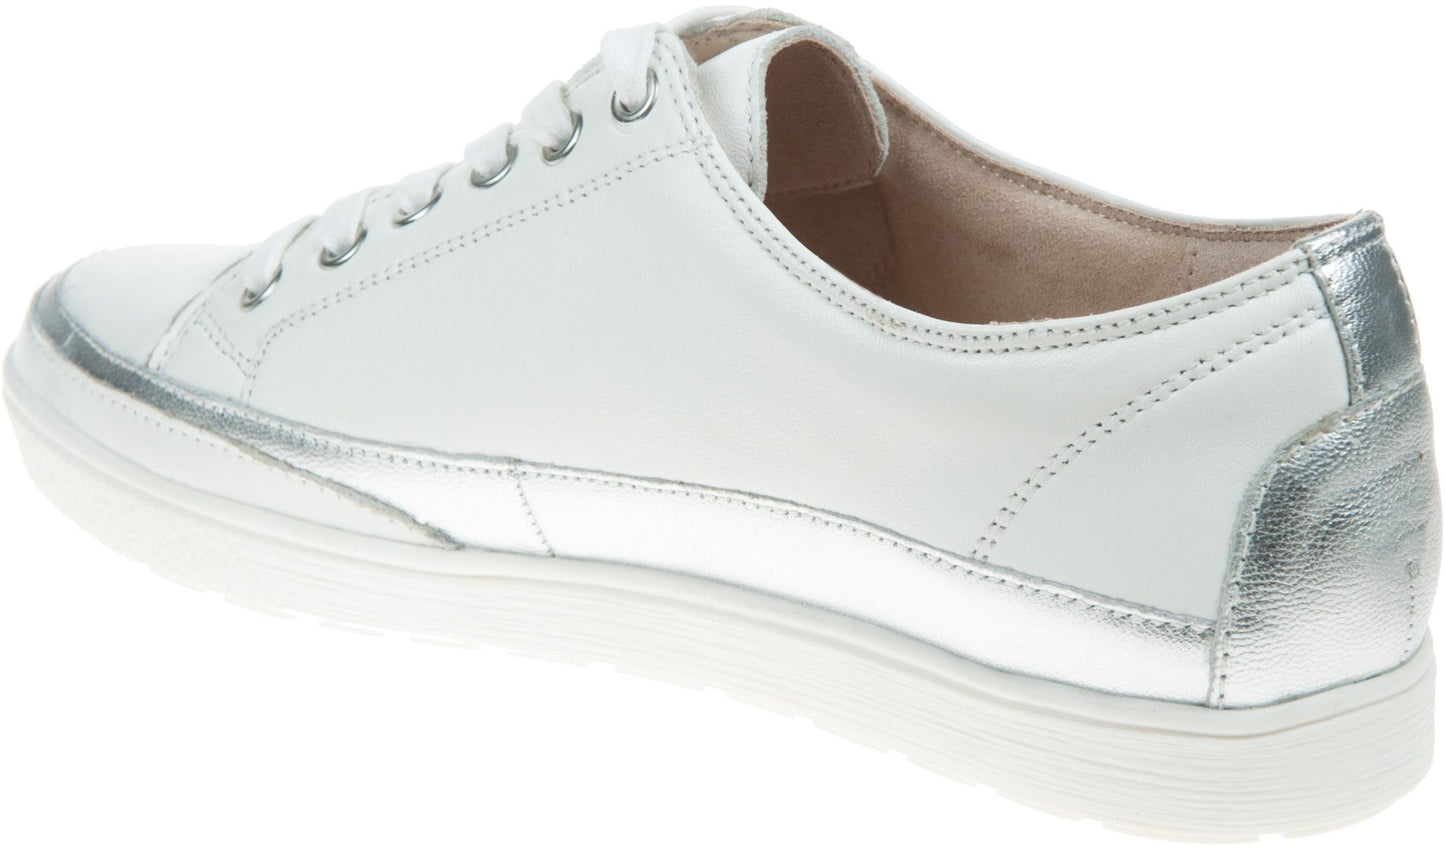 Caprice white nappa leather lace up Trainer Only size 4 and 7 left